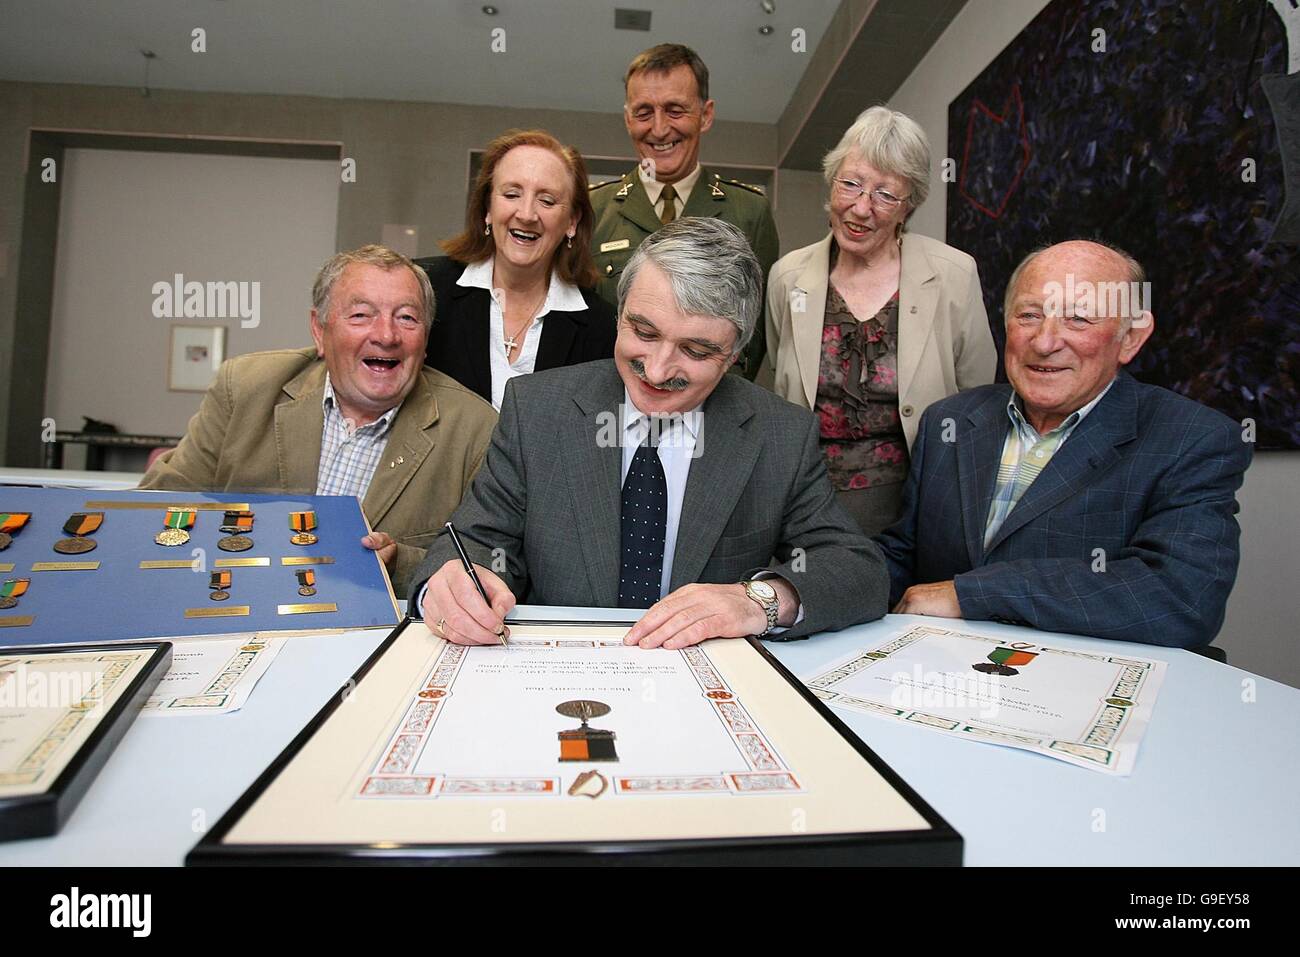 Minister for Defence Willie O'Dea (centre) signs official certificates to replace lost,s tolen or destroyed 1916/War of Independence Medals, alongside relatives of 1916 survivors (left to right) Dominick Darling, Gabrielle Darling Byrne, Colonel Chris Moore, Eilish O'Toole and Con Clarke, at Government Buildings in Dublin. Stock Photo